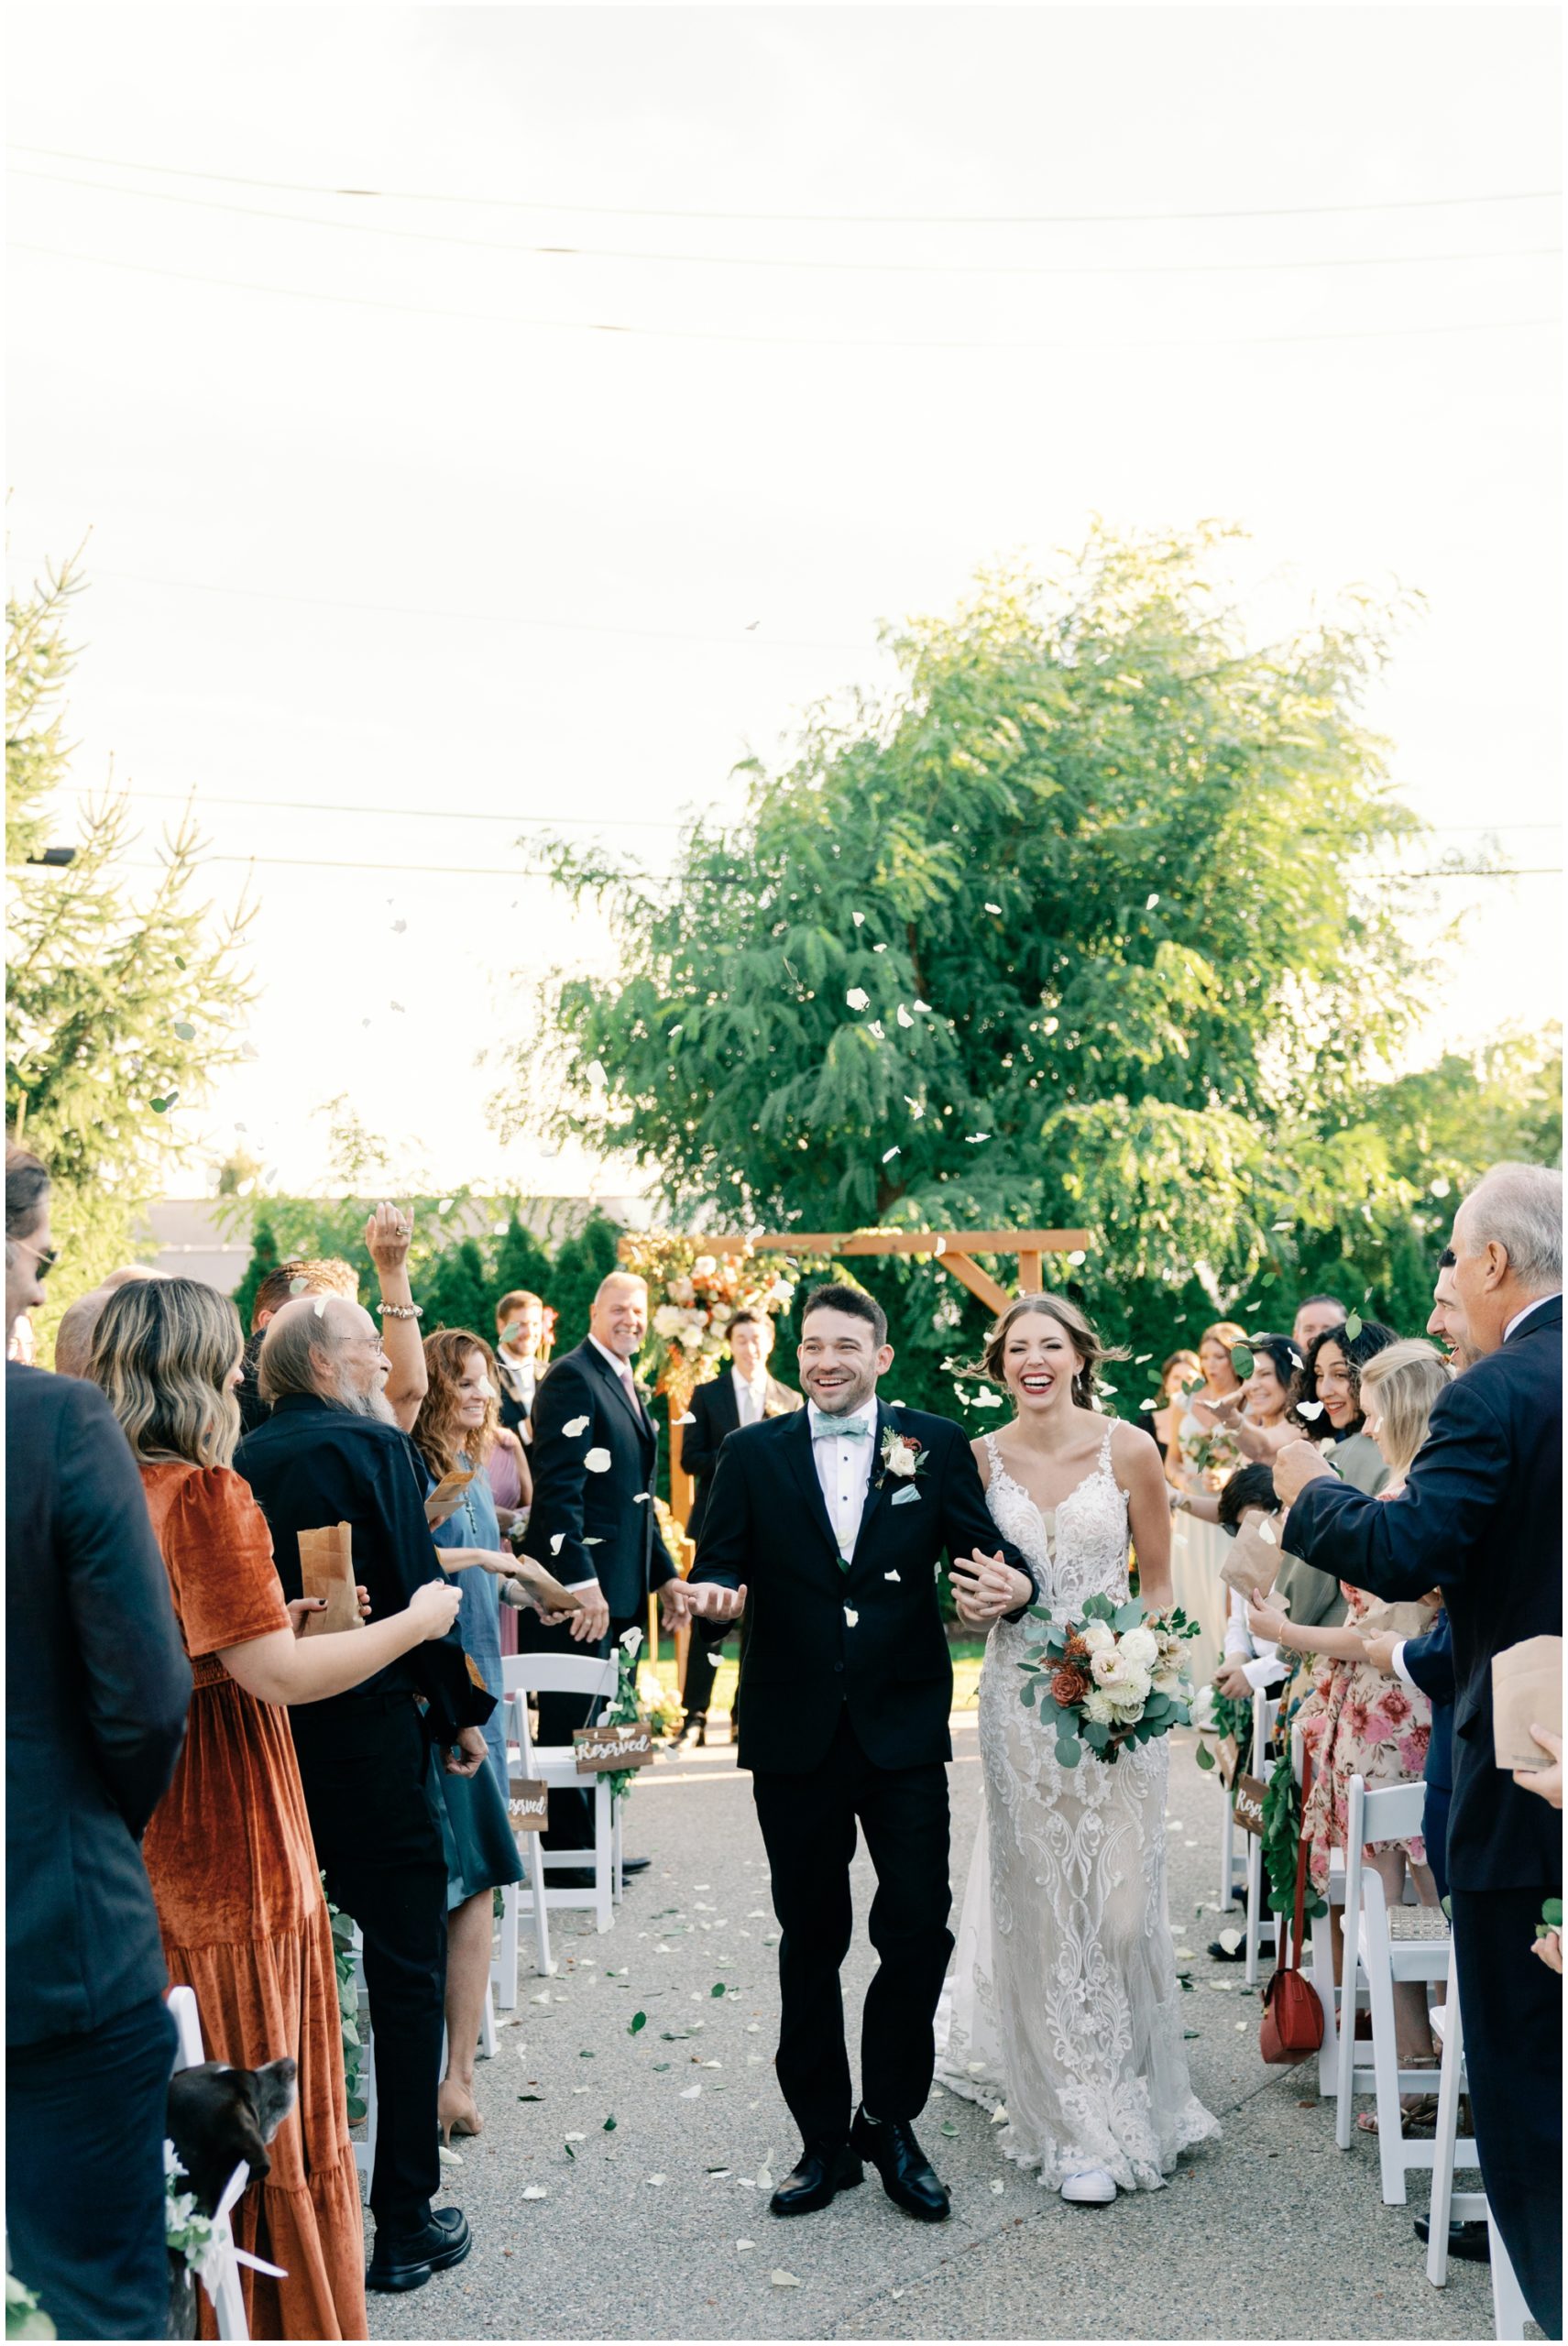 Great Lakes Culinary Center wedding